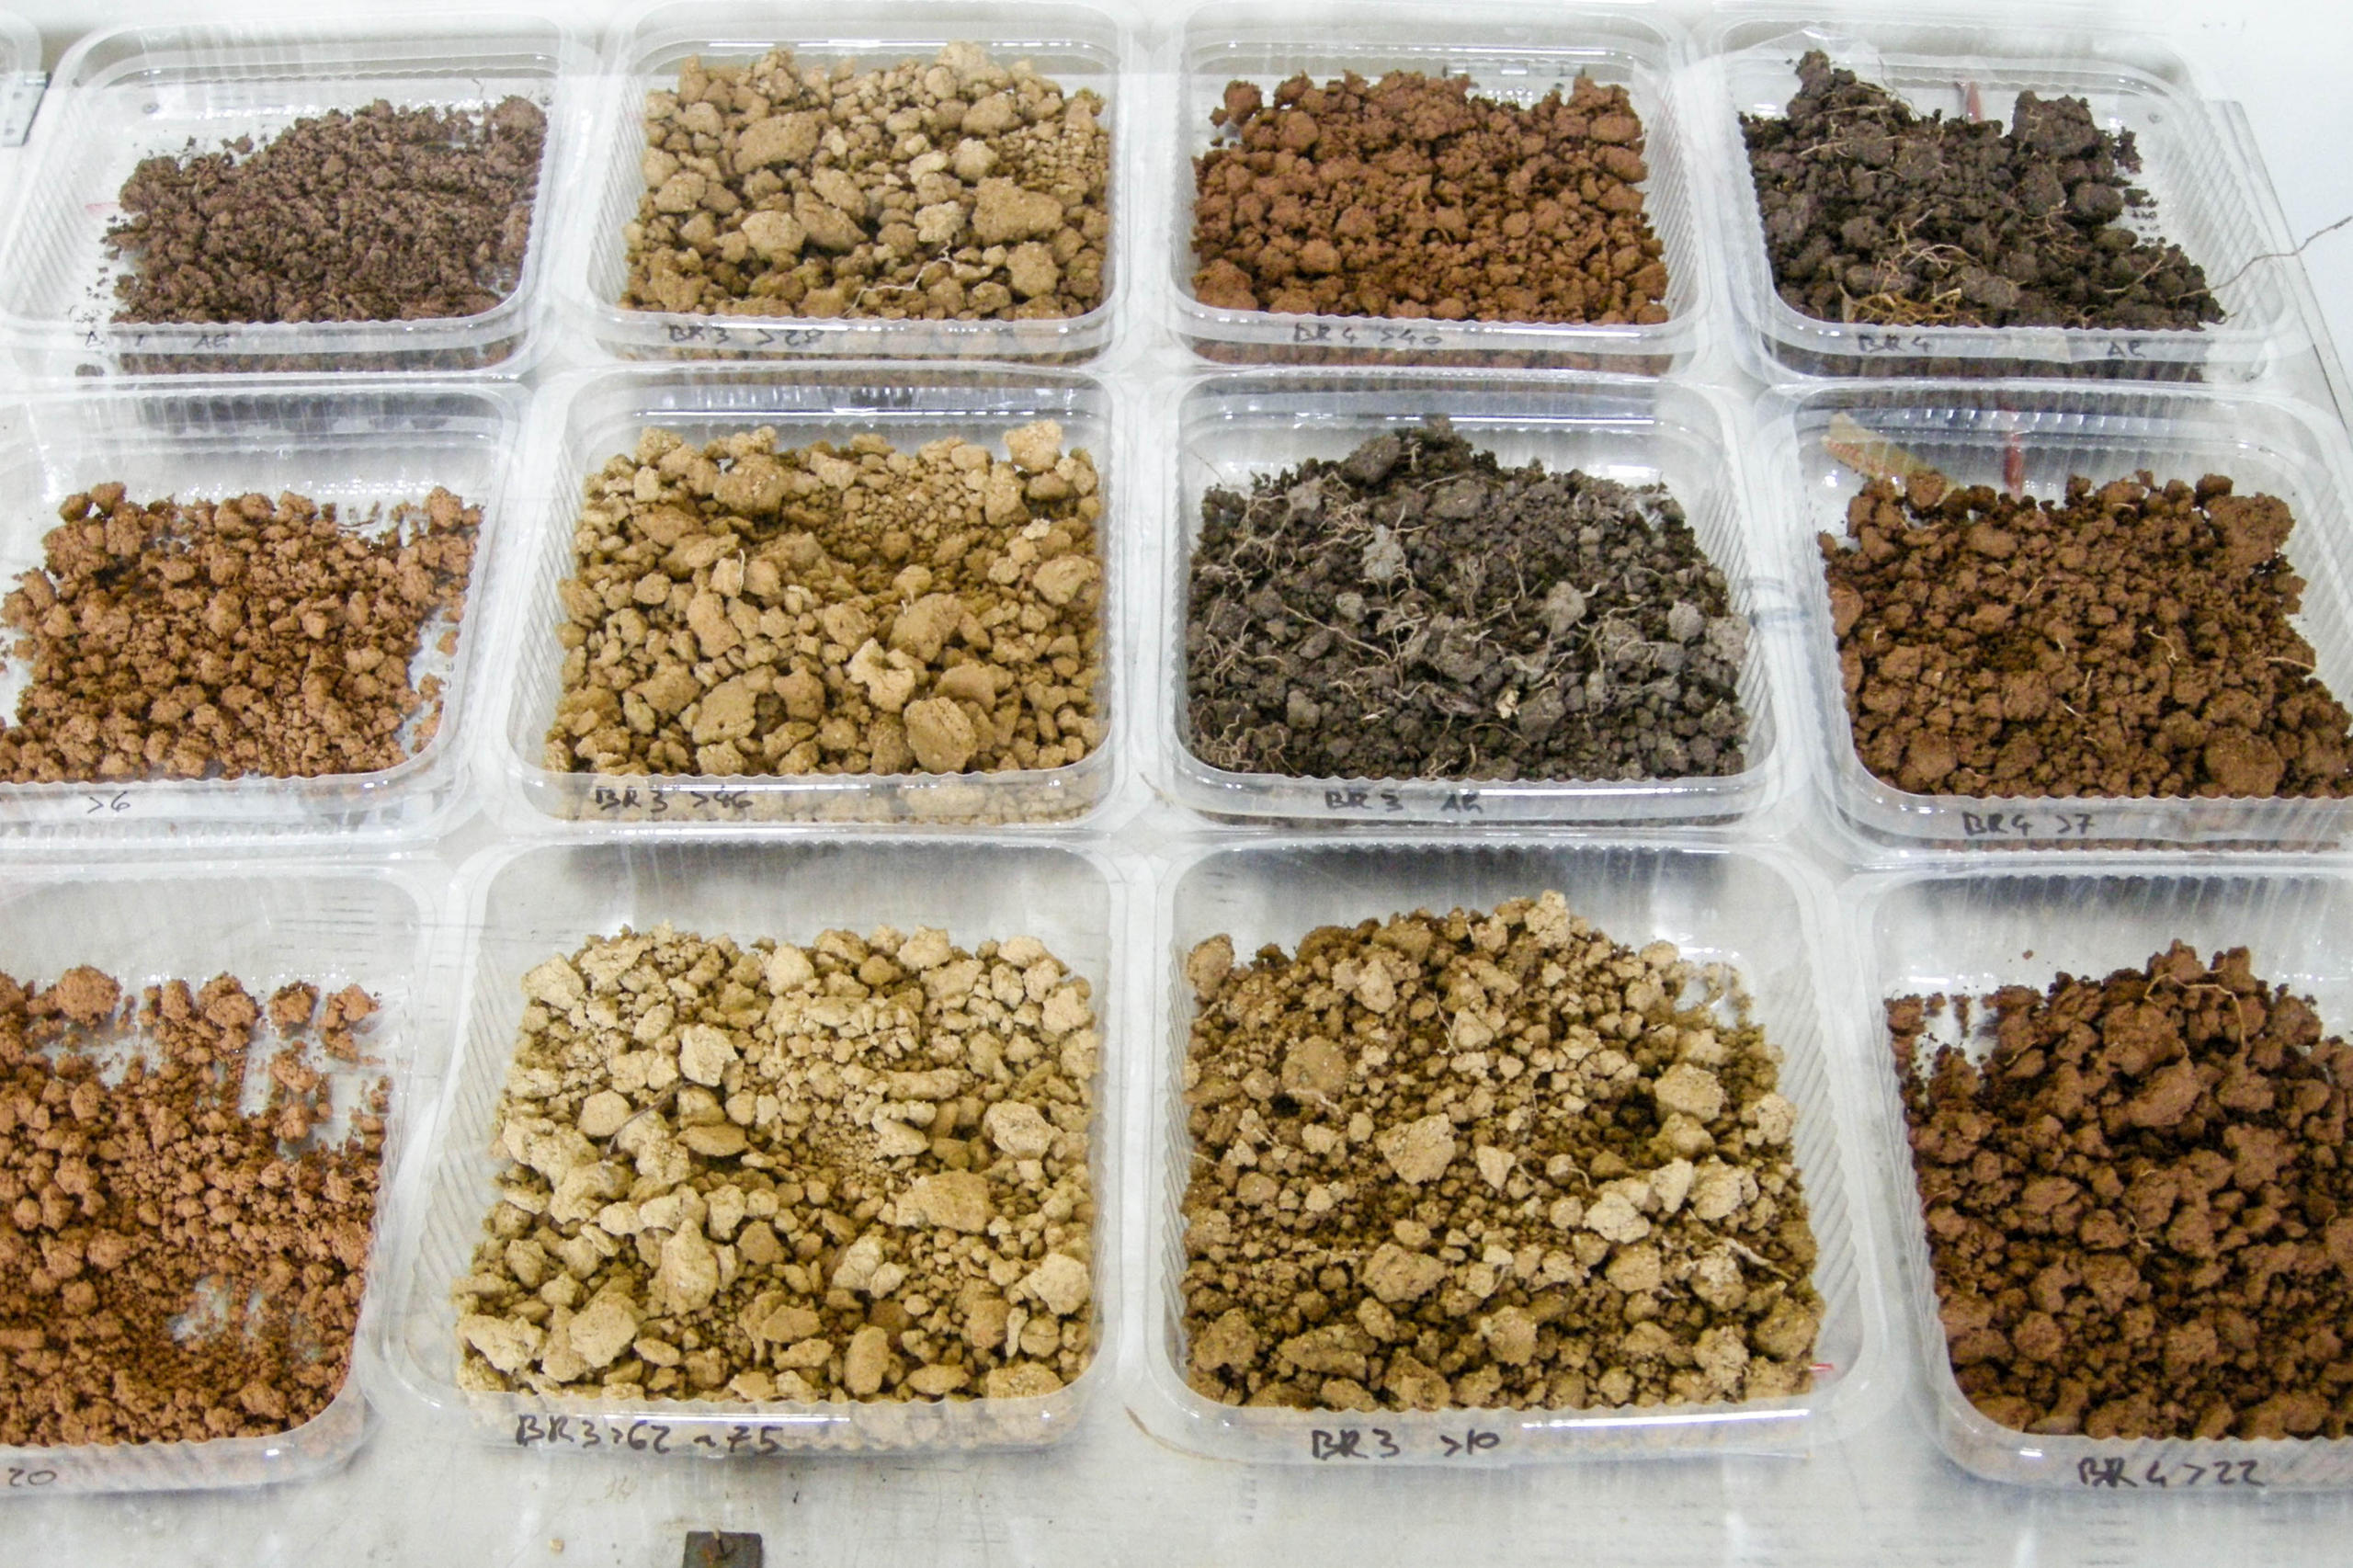 Different types of soil.